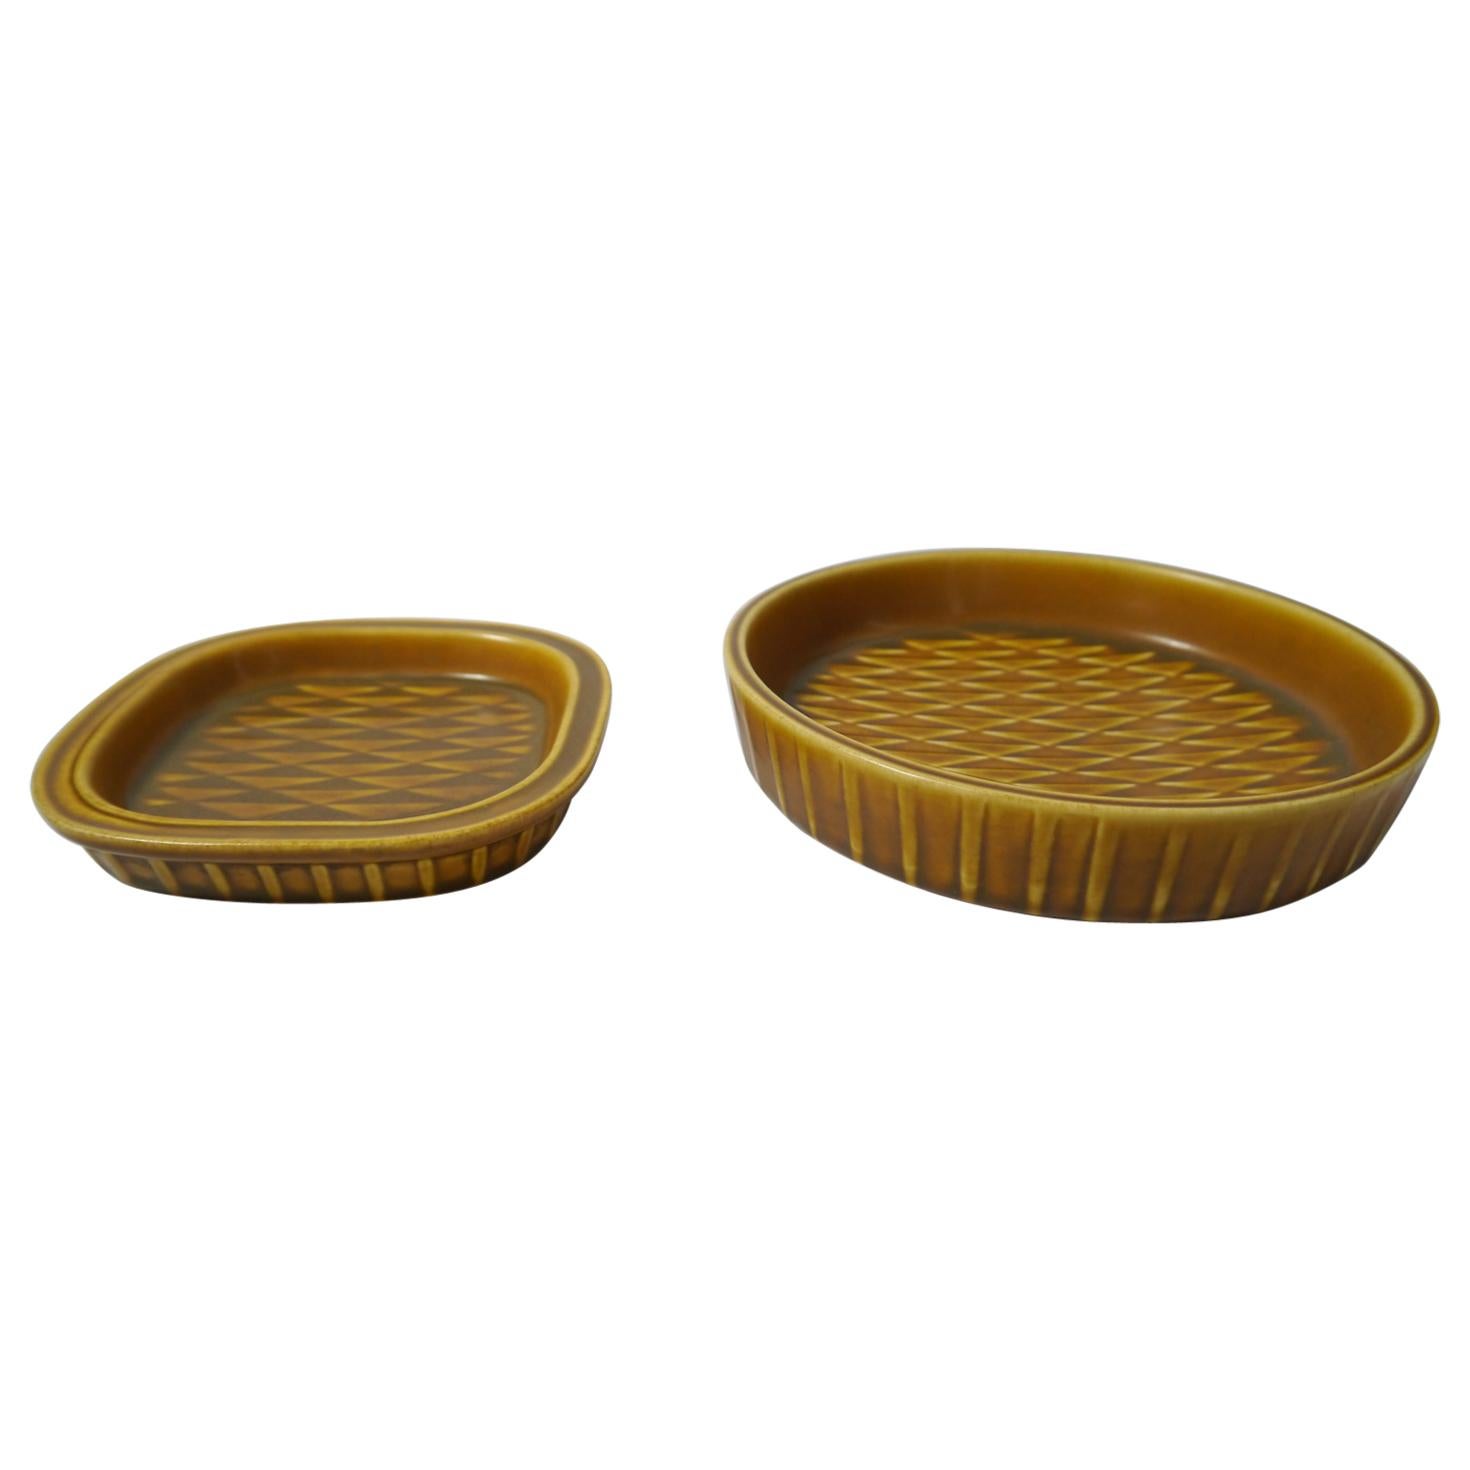 Two Mustard Yellow Ceramic Plates by Gunnar Nylund for Rörstrand, Sweden, 1950s For Sale